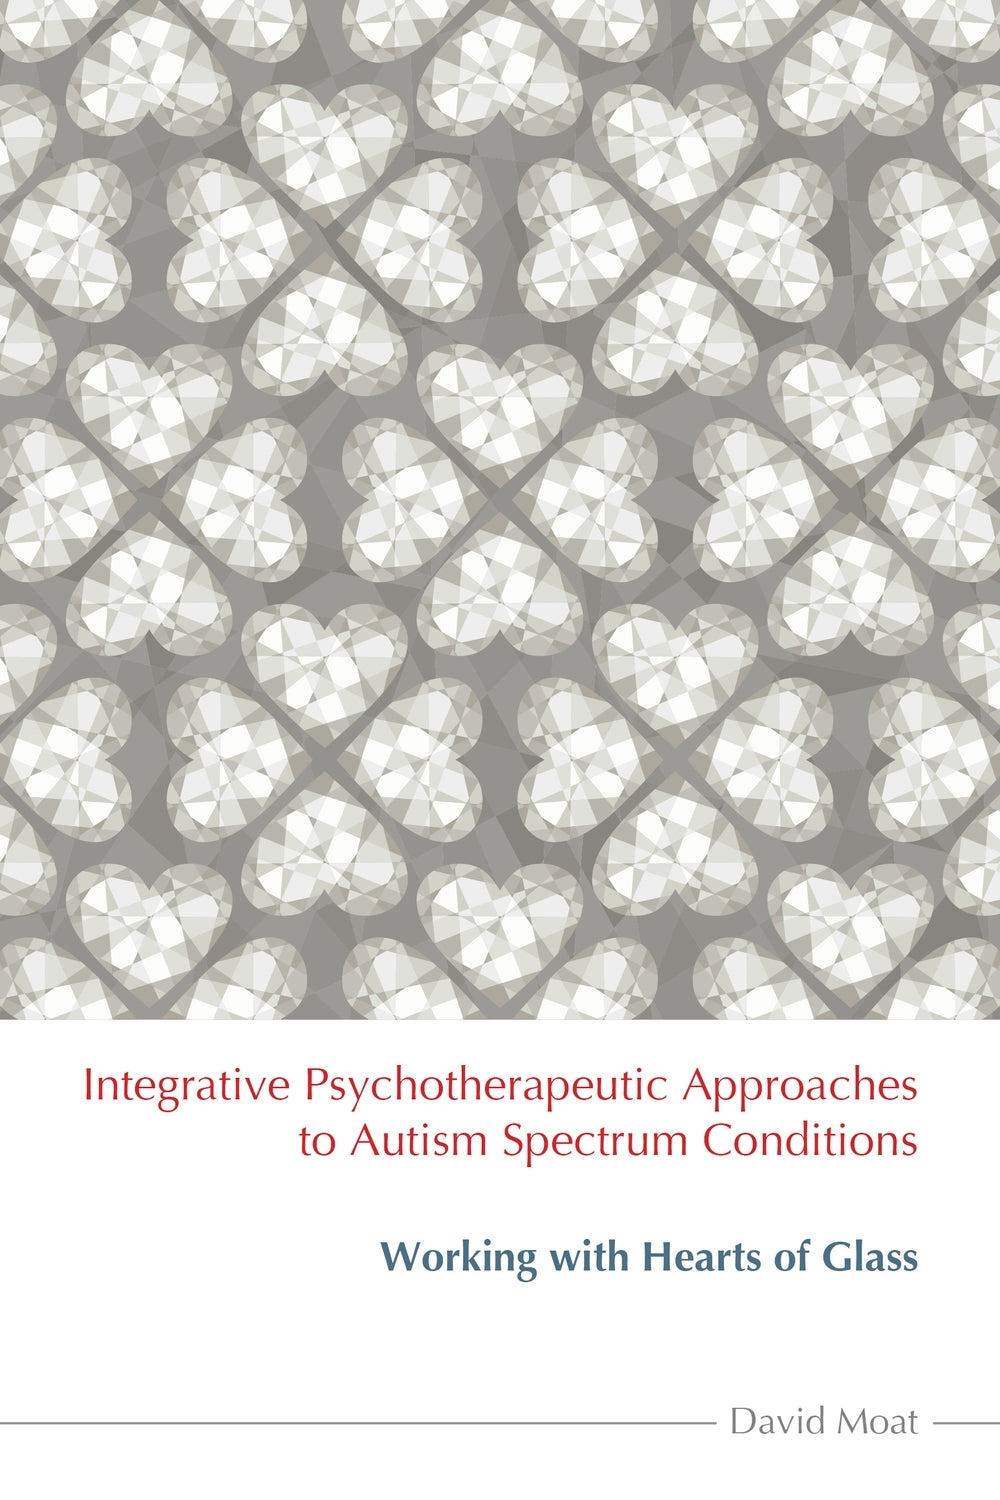 Integrative Psychotherapeutic Approaches to Autism Spectrum Conditions by David Moat